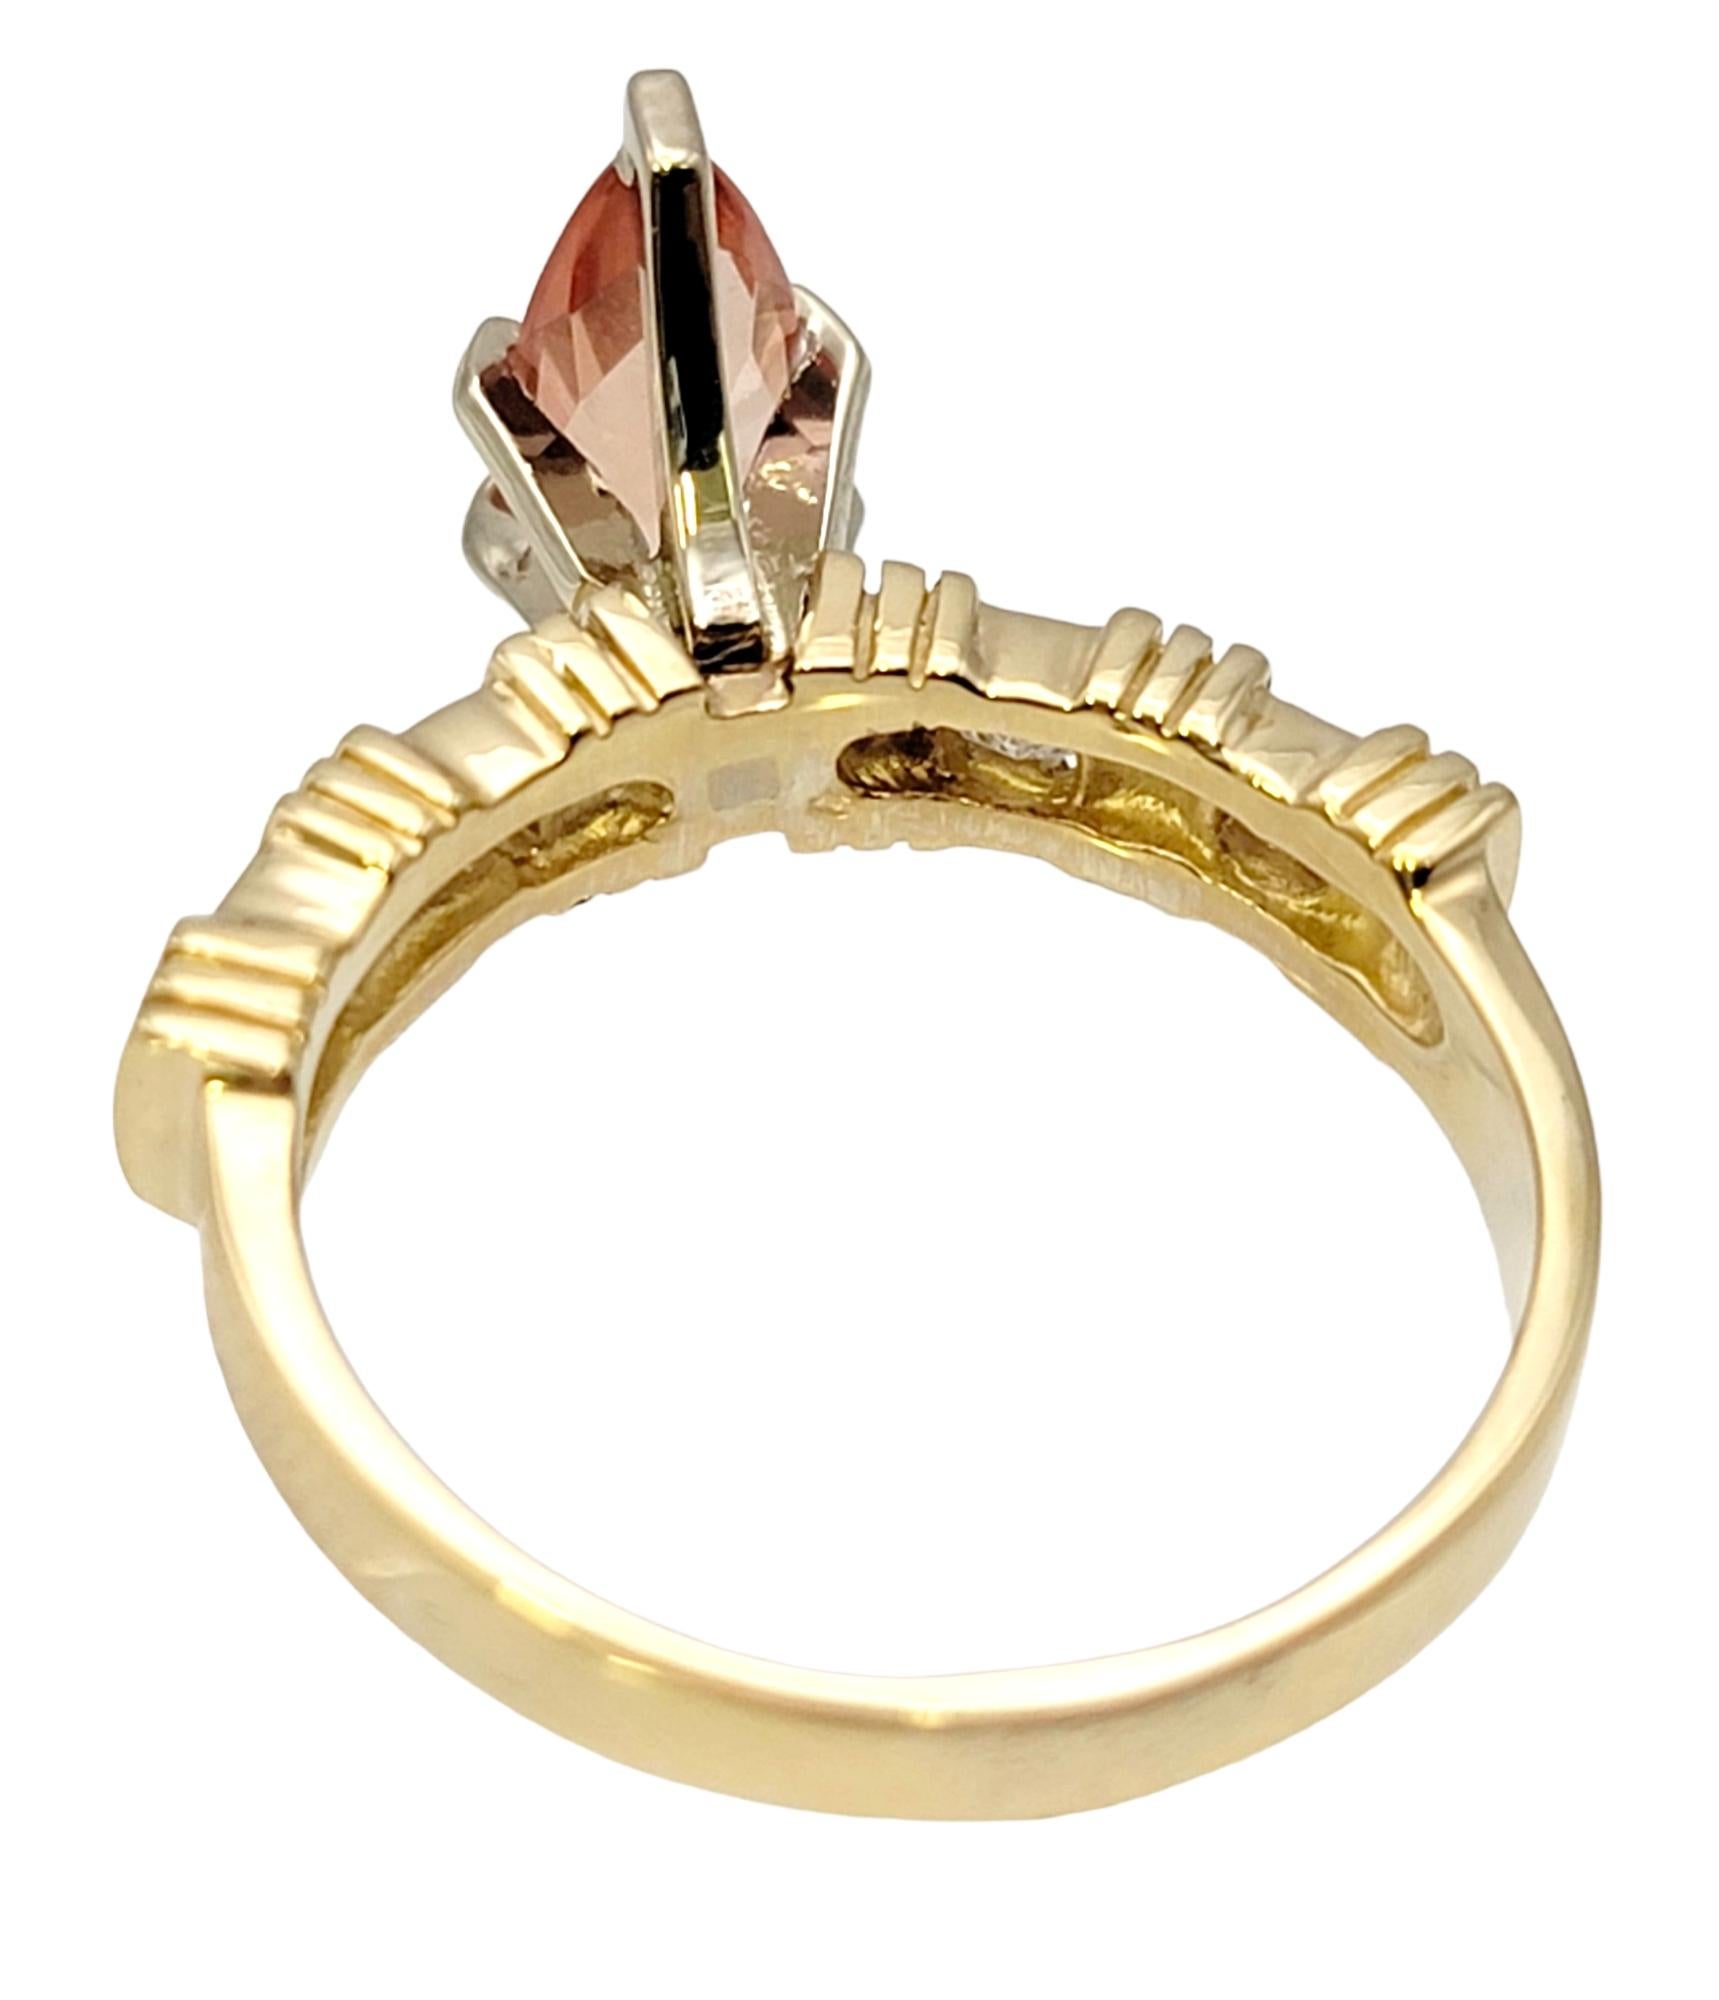 Solitaire Marquis Cut Orange Tourmaline and Diamond Ring in 14 Karat Yellow Gold In Good Condition For Sale In Scottsdale, AZ